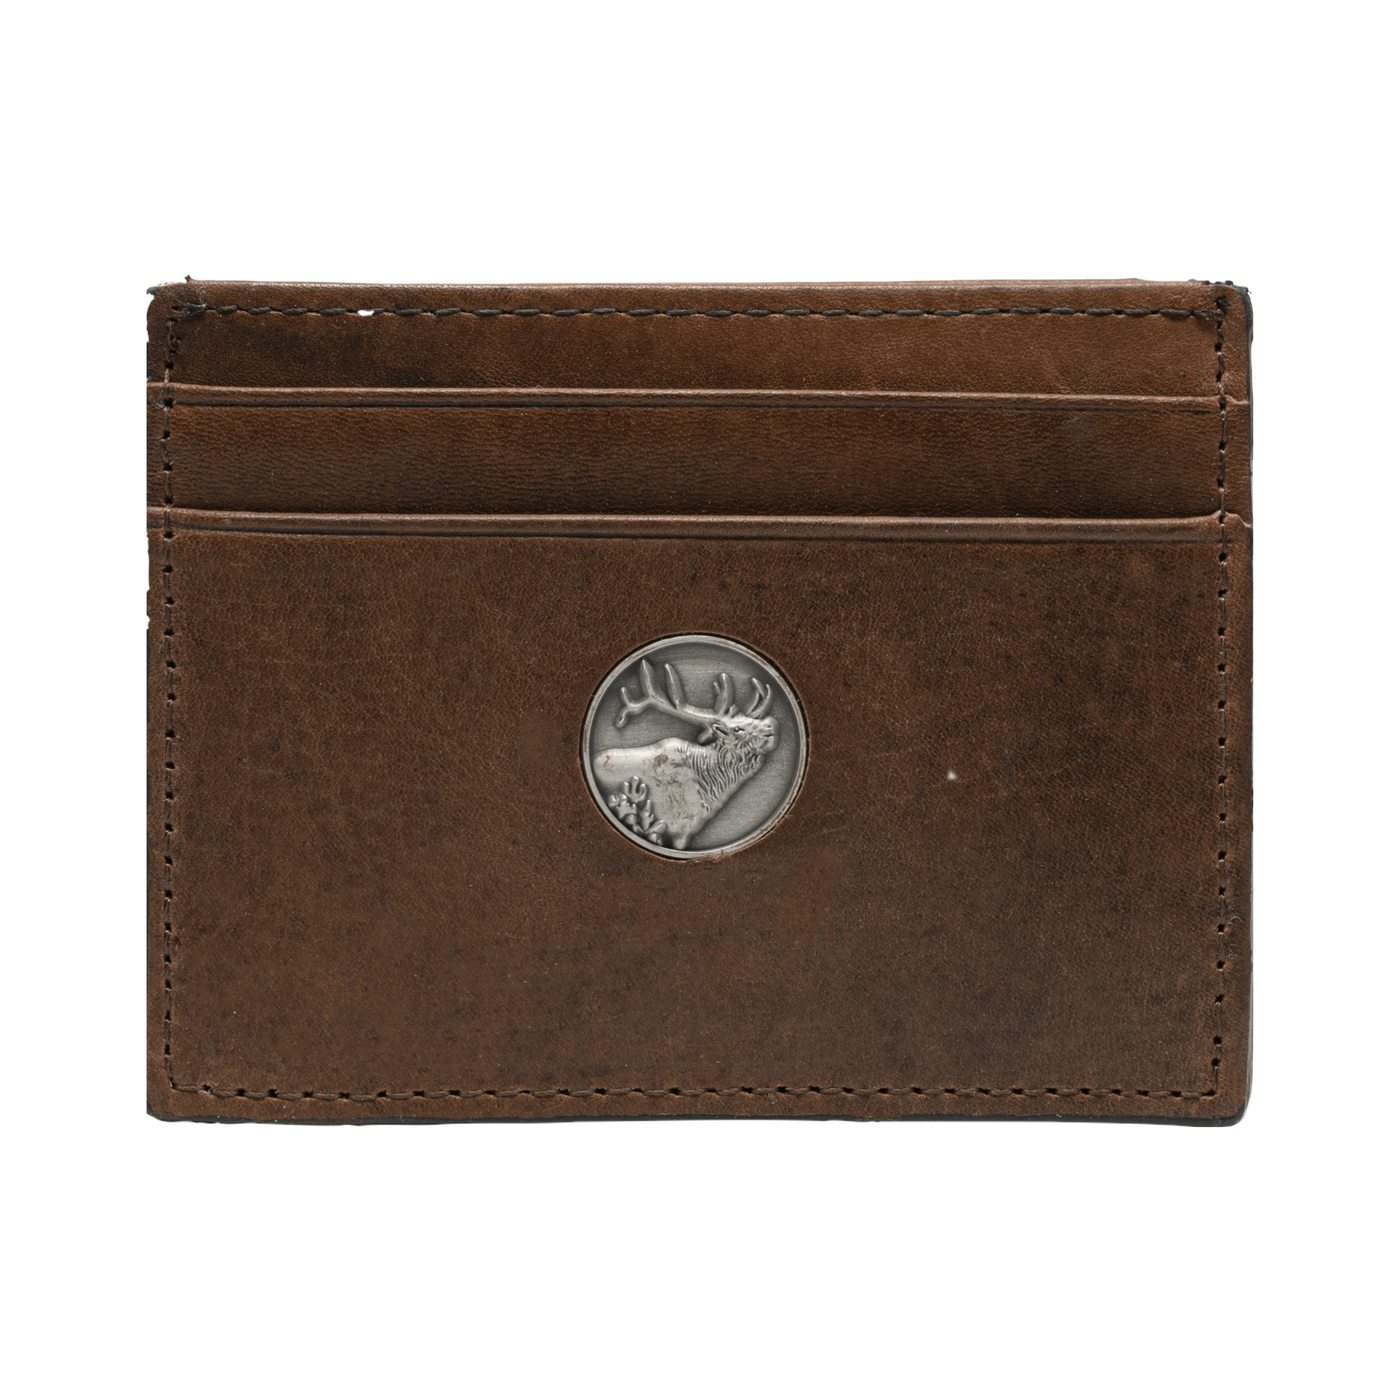 For those who prefer a more minimalist style, check out our Dynasty Minimalist Elk Wallet, with its premier full grain leather and hand-oiled stylish finish, you won't be disappointed. 3 Card Slots ID Window Center Bill Compartment Ultra Slim Minimalist Design Weber’s Signature Elk Concho Dimensions: 3"L x 4"H RFID Protection Color: Brown